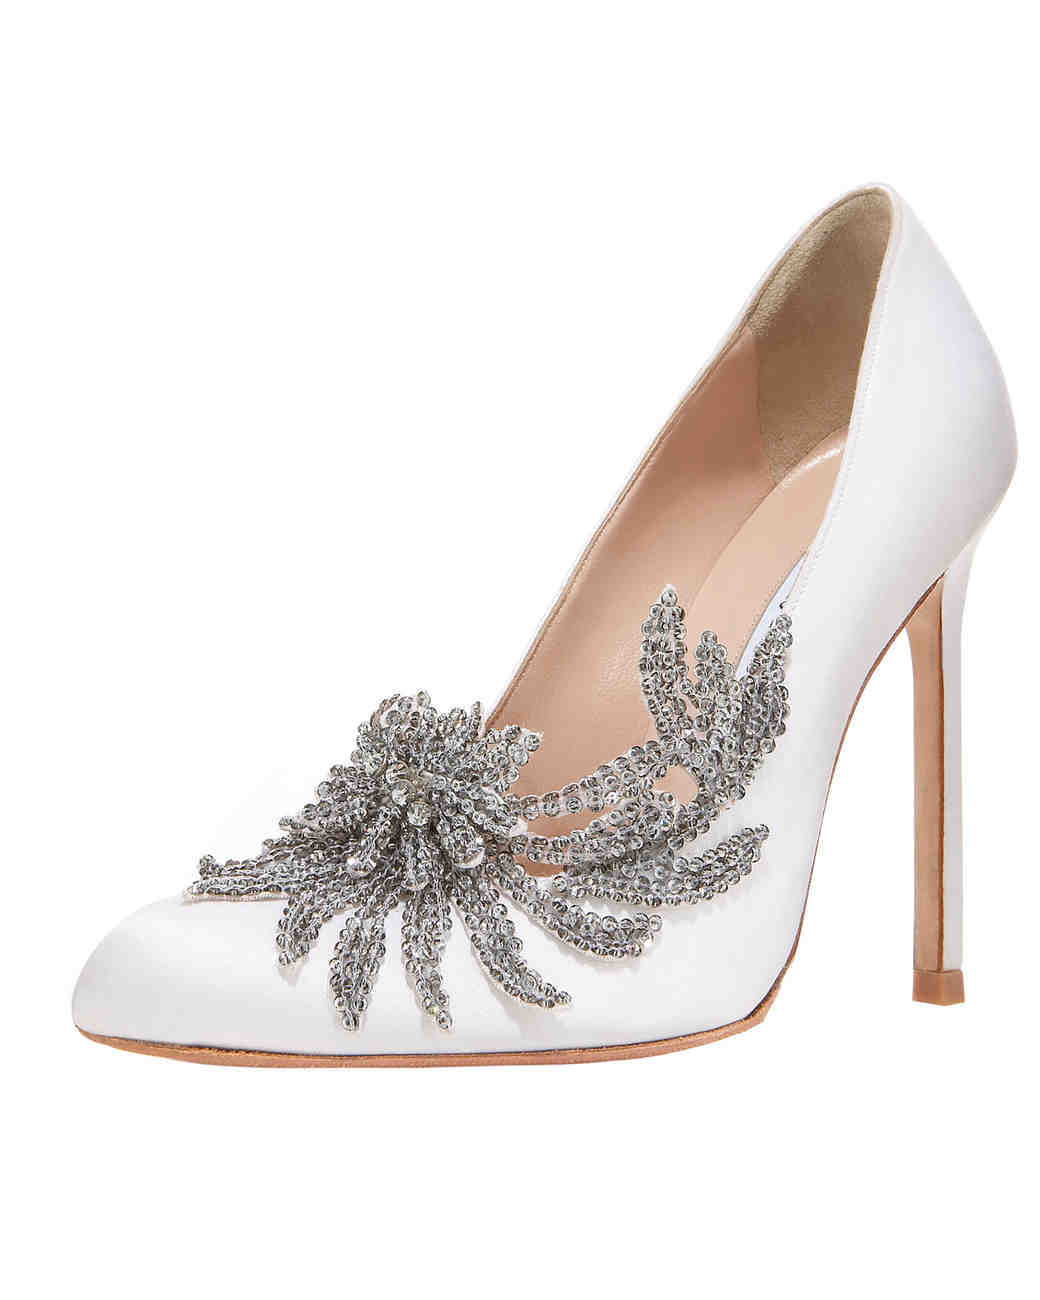 Shoes For A Wedding
 36 Best Shoes for a Bride to Wear to a Fall Wedding